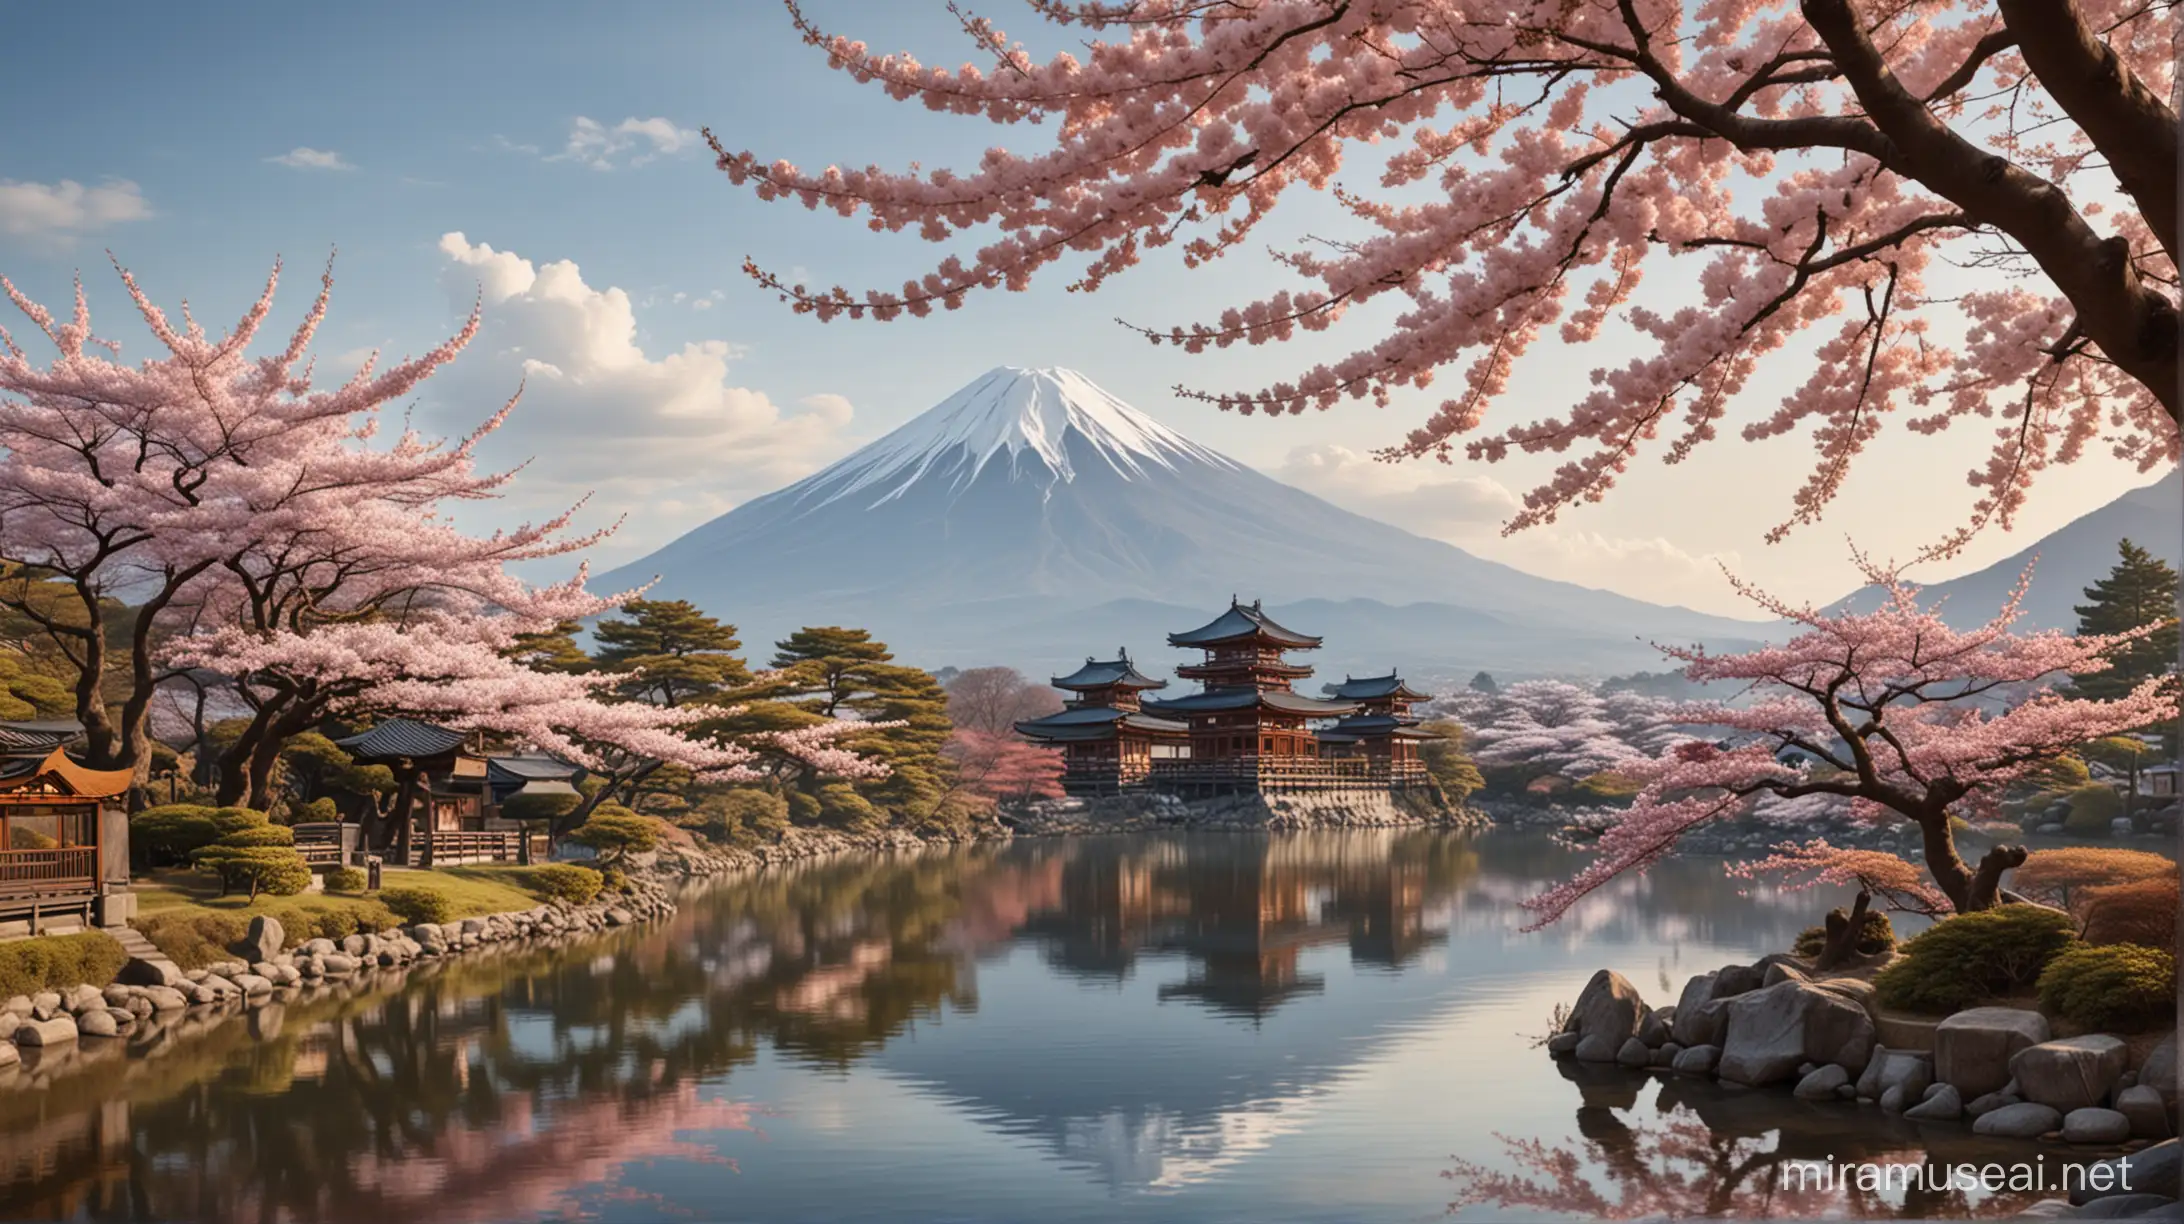 Japanes landscape with mount fuji, temples a lake and cherry blossom trees, around the year 1700 photo realism

